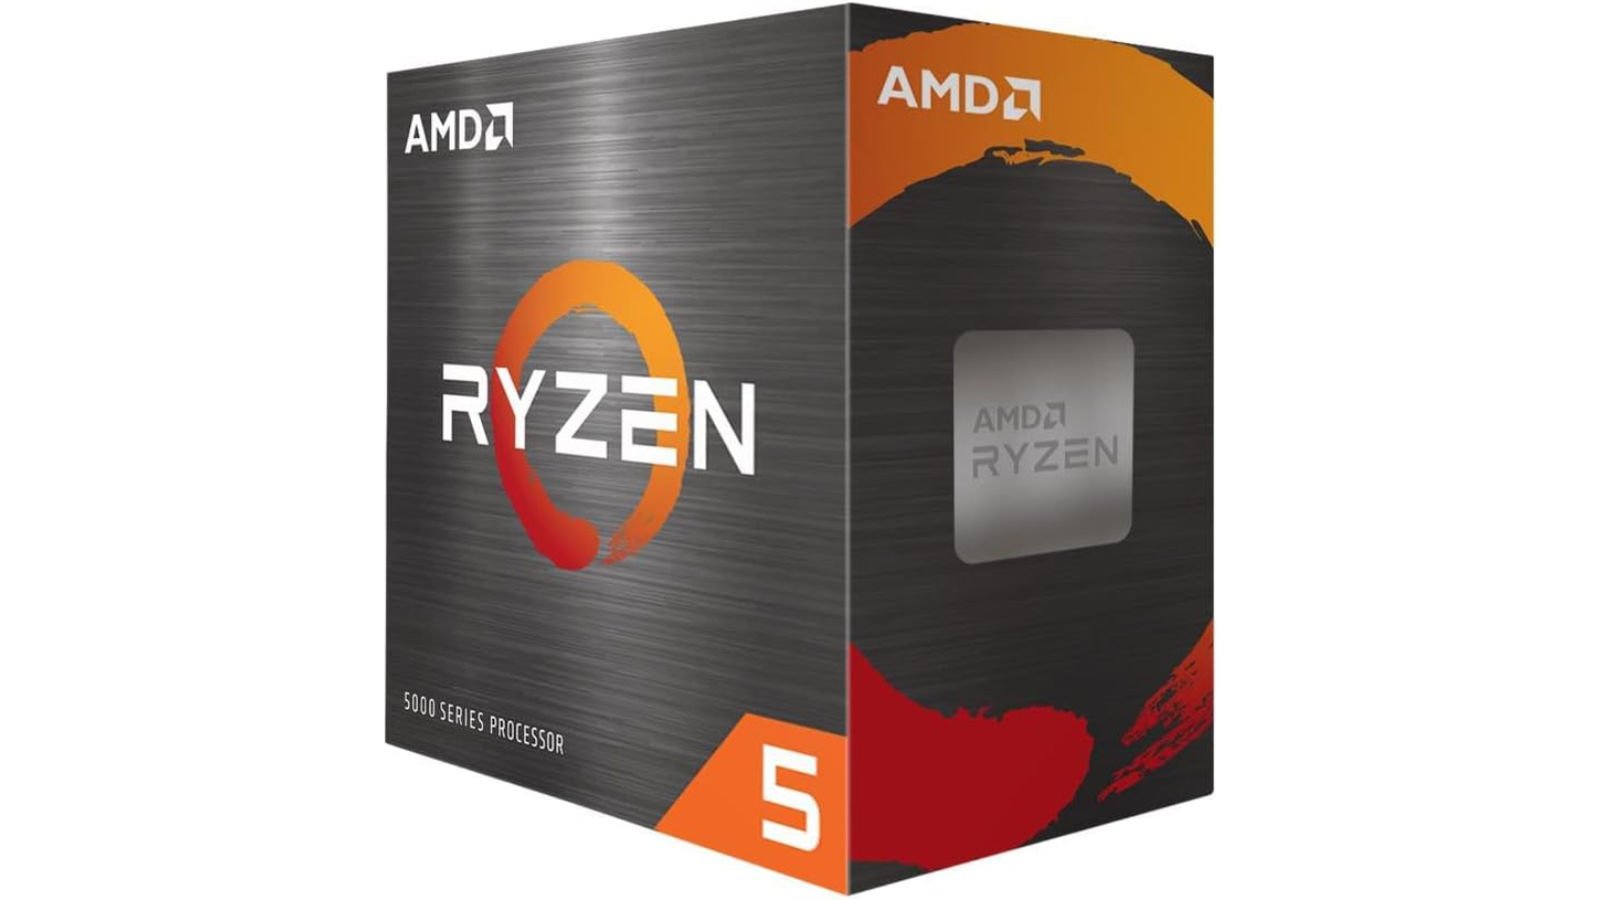 AMD Ryzen 5 5600 series retail packaging against a white background.